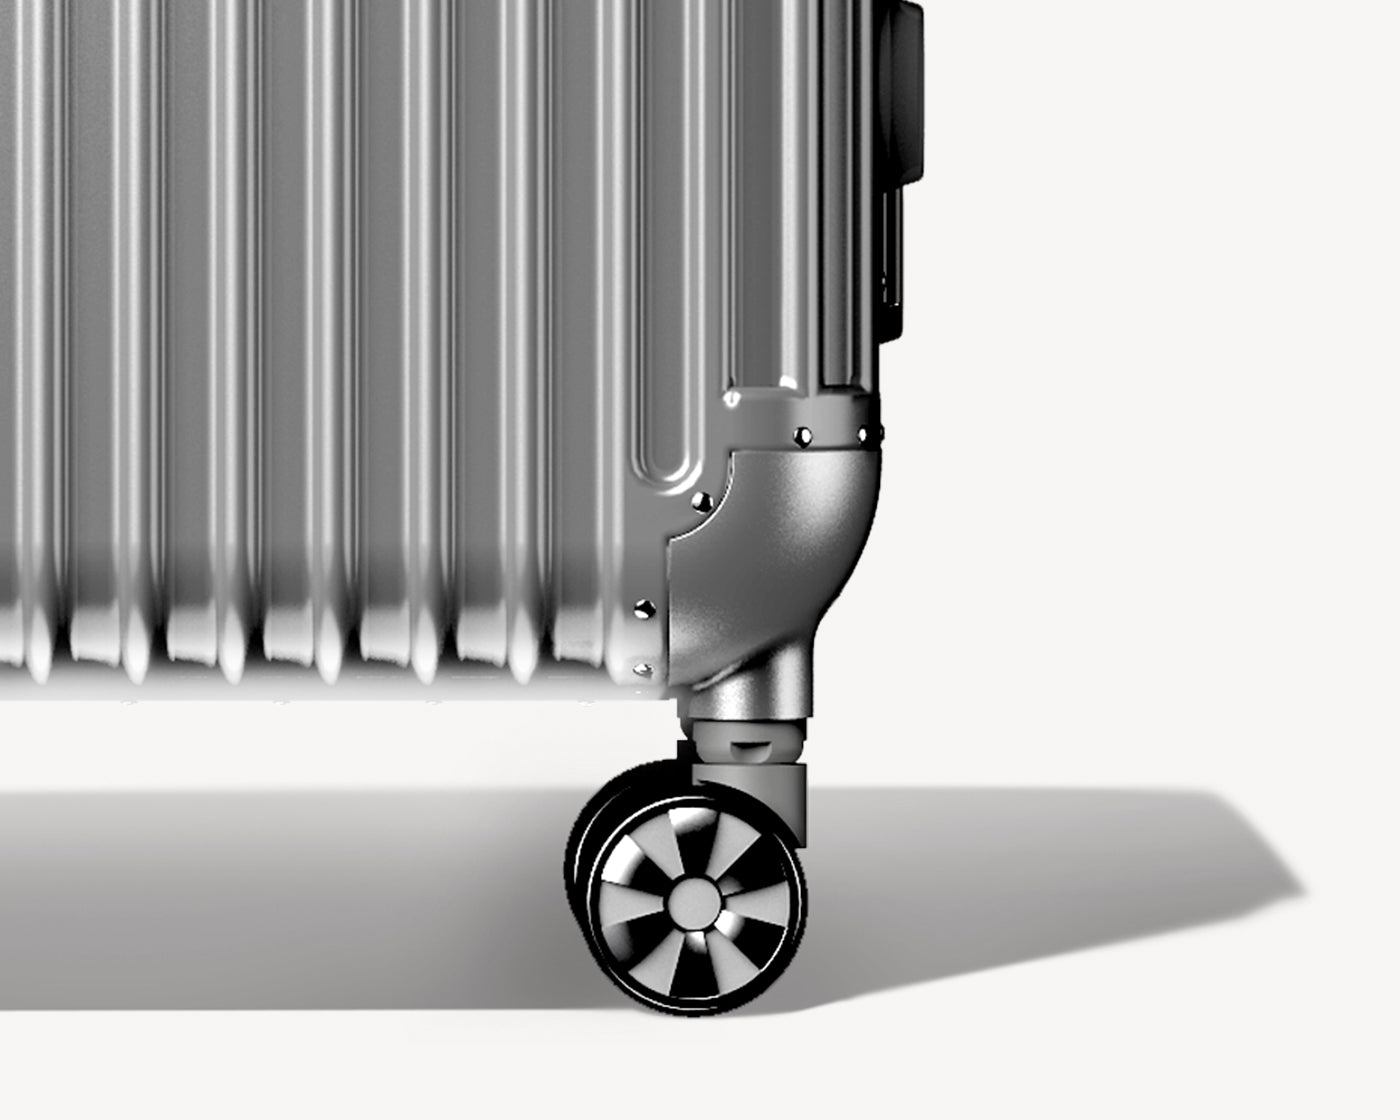 Detailed view of the bottom corner of a silver metallic luggage showing the wheel and lower part of the retractable handle.